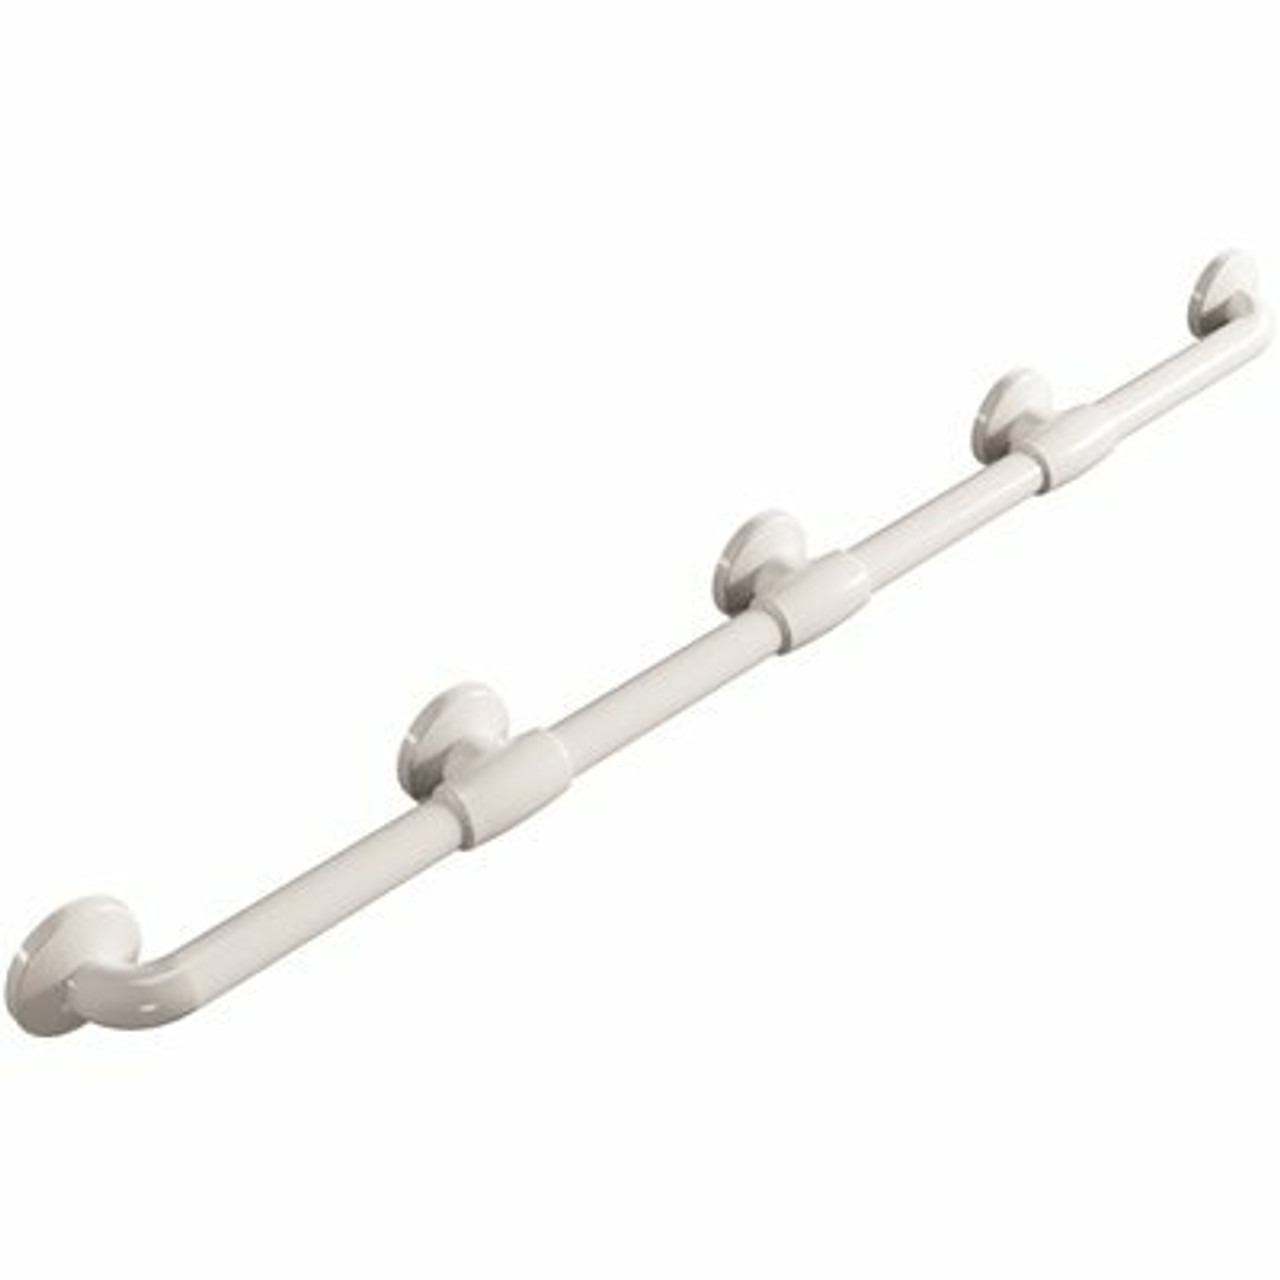 Ponte Giulio Usa 42 In. Antimicrobial Vinyl Coated Grab Bar With Three Reinforced Flanges In White